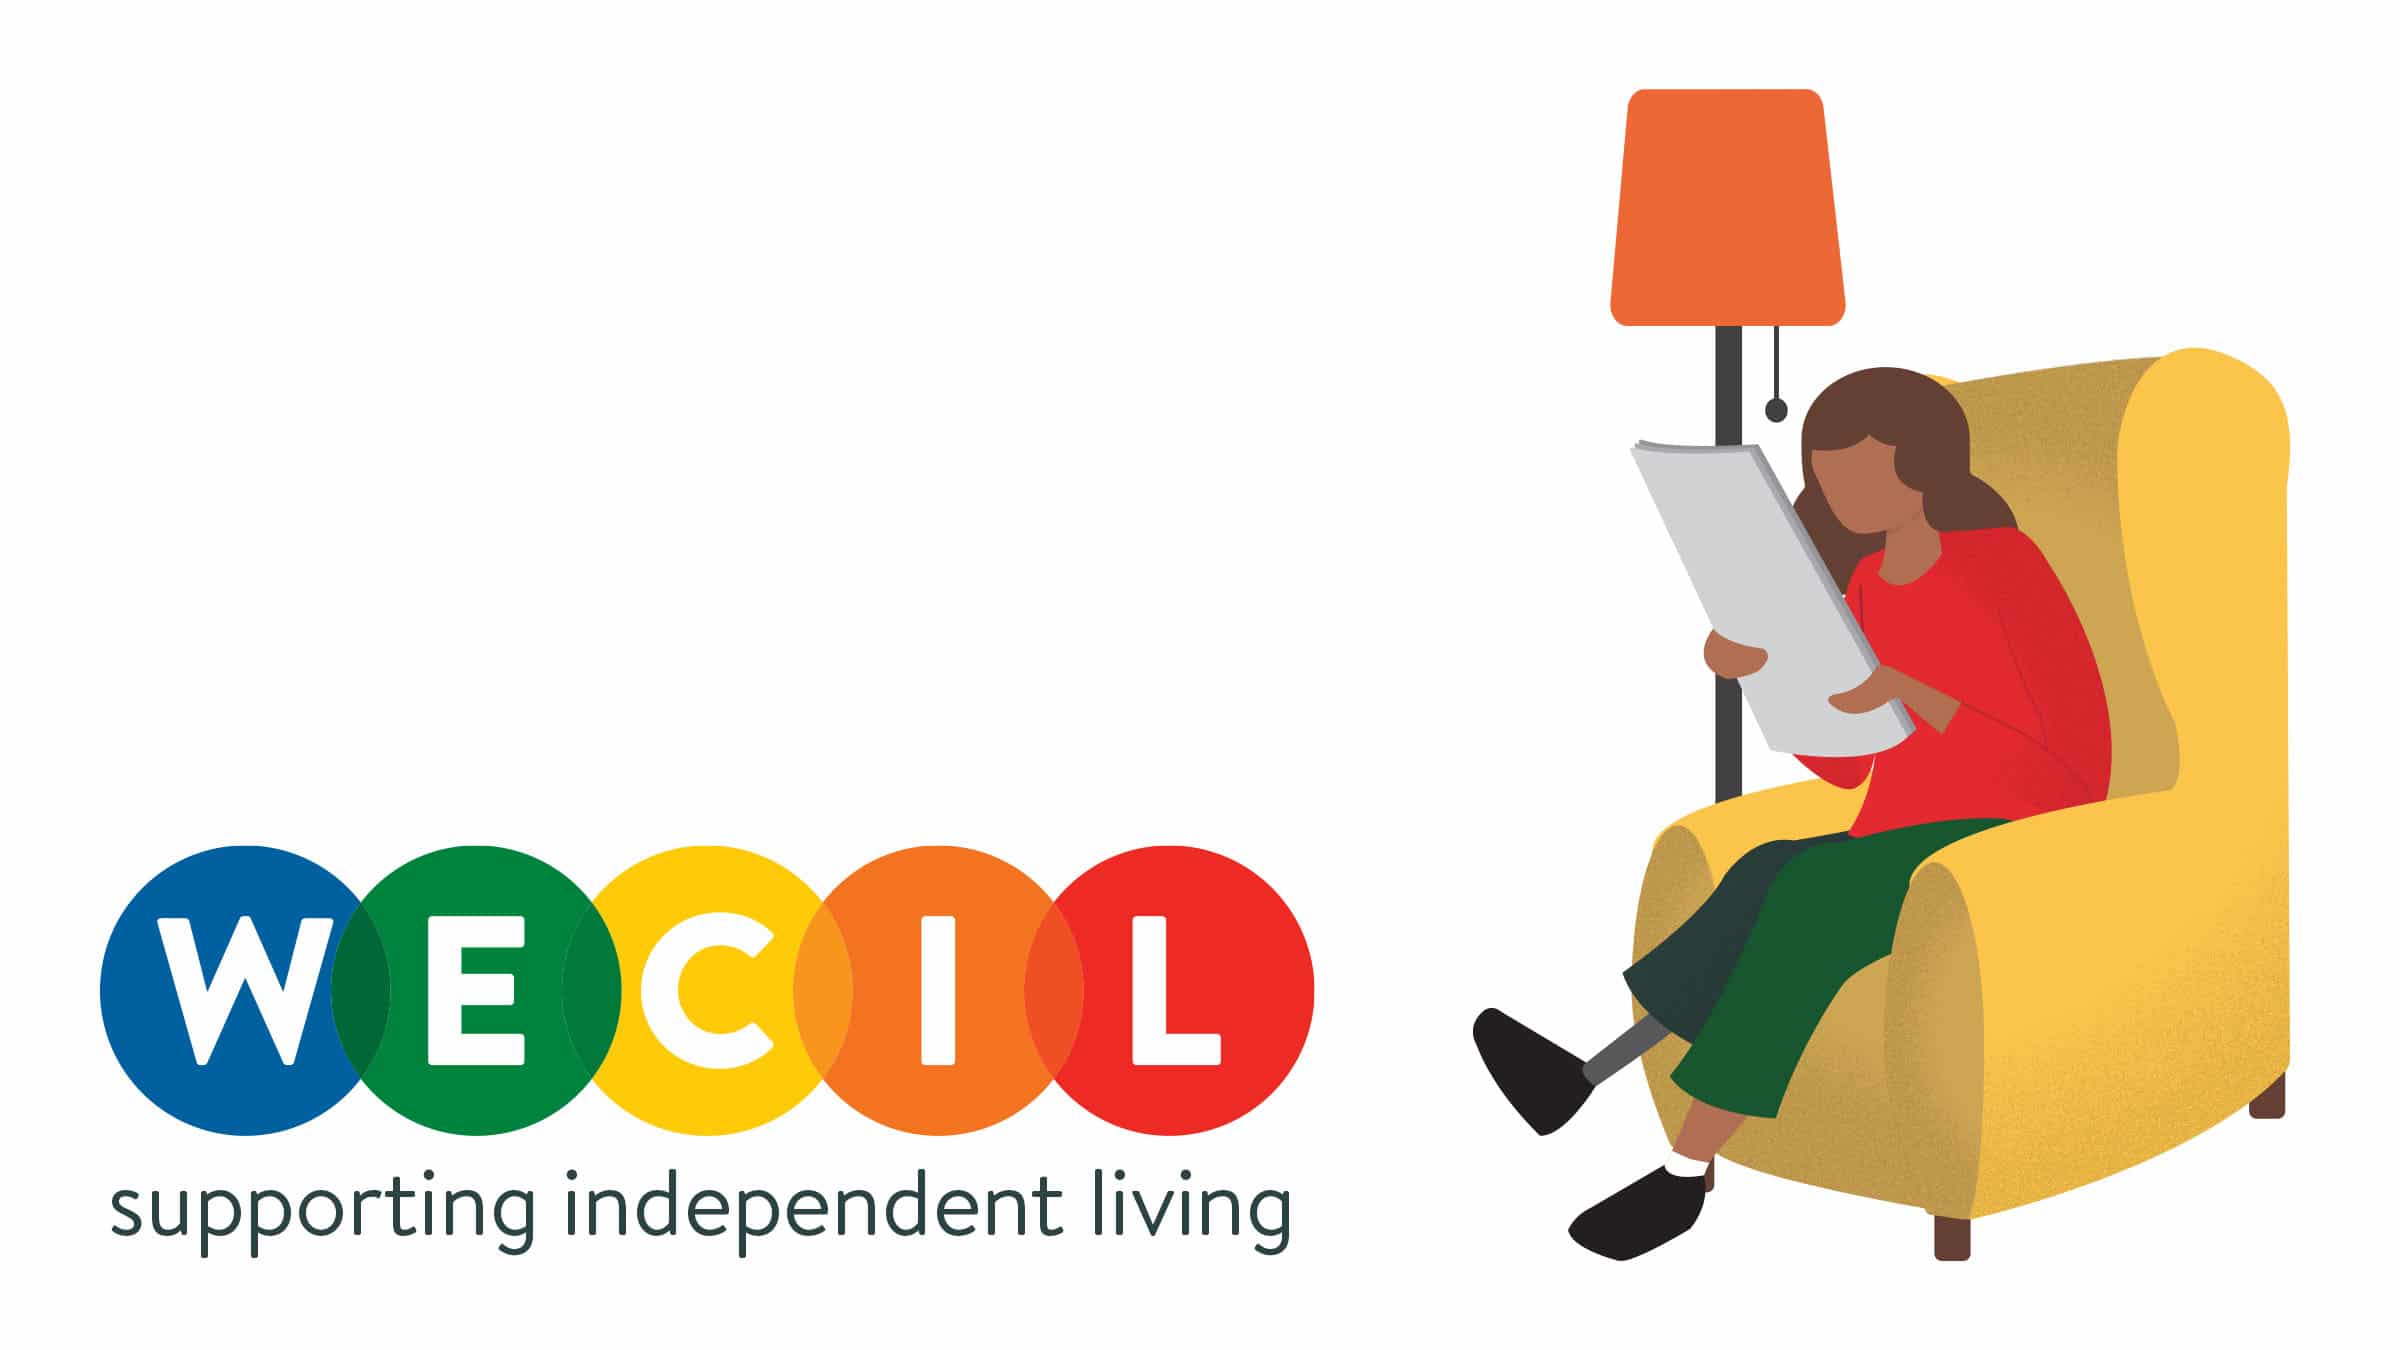 WECIL logo and an illustration of a Disabled person in a chair